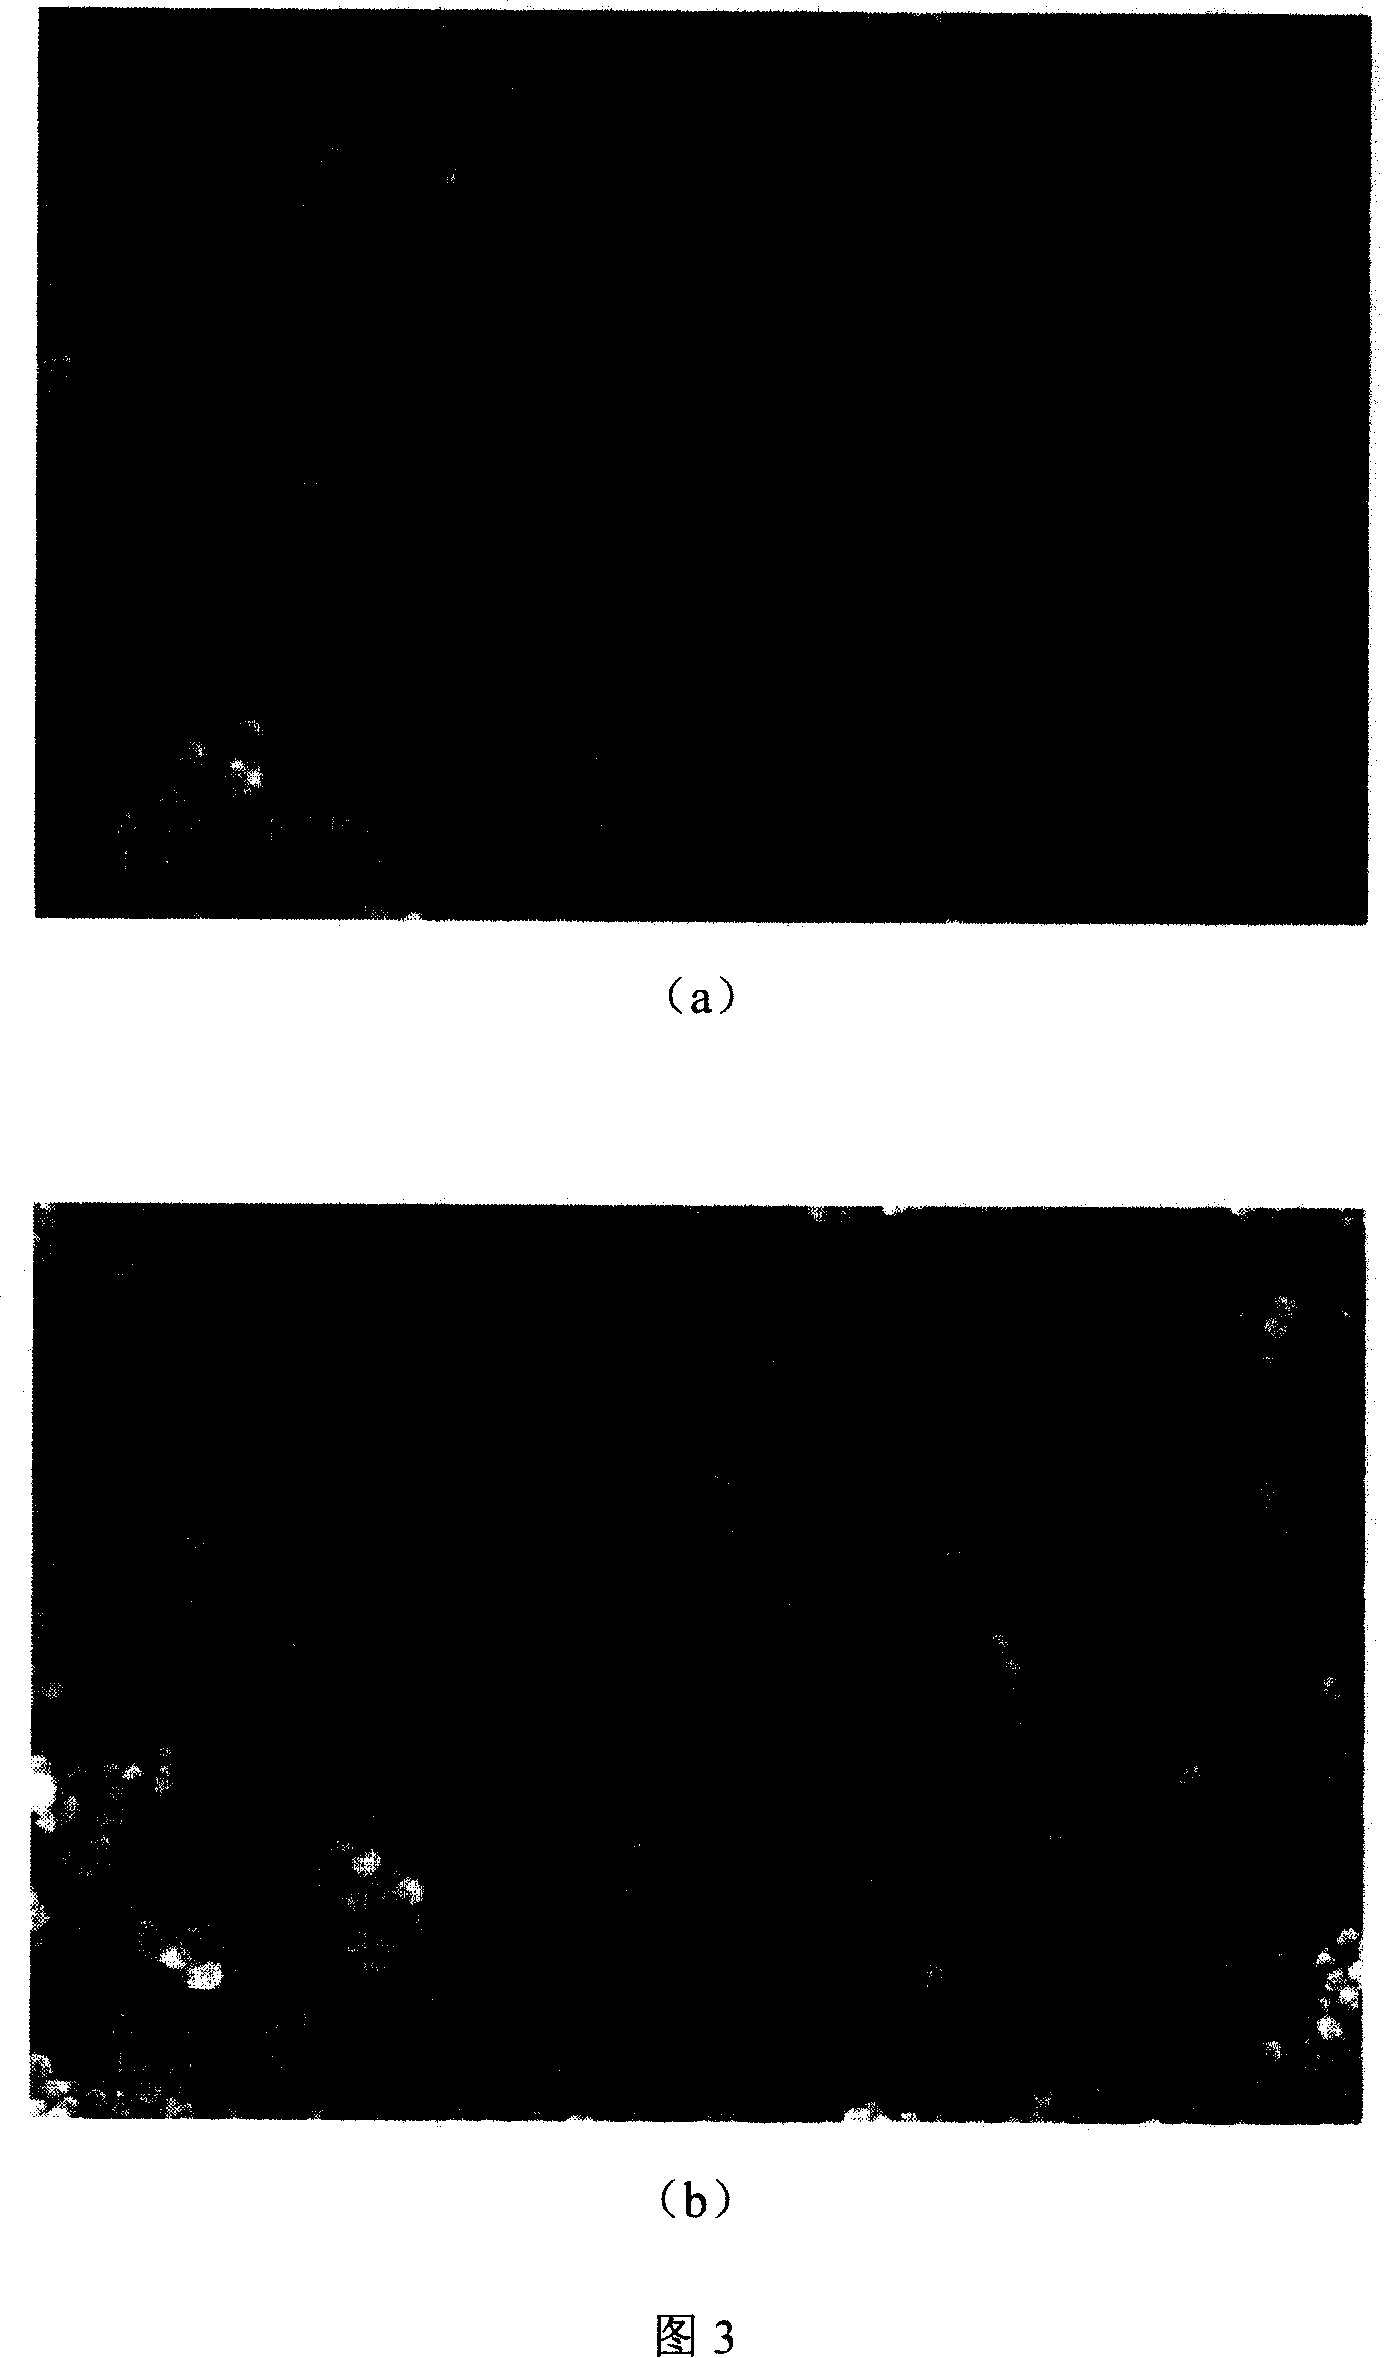 Method for producing nano zinc peroxide and zinc oxide by using solar